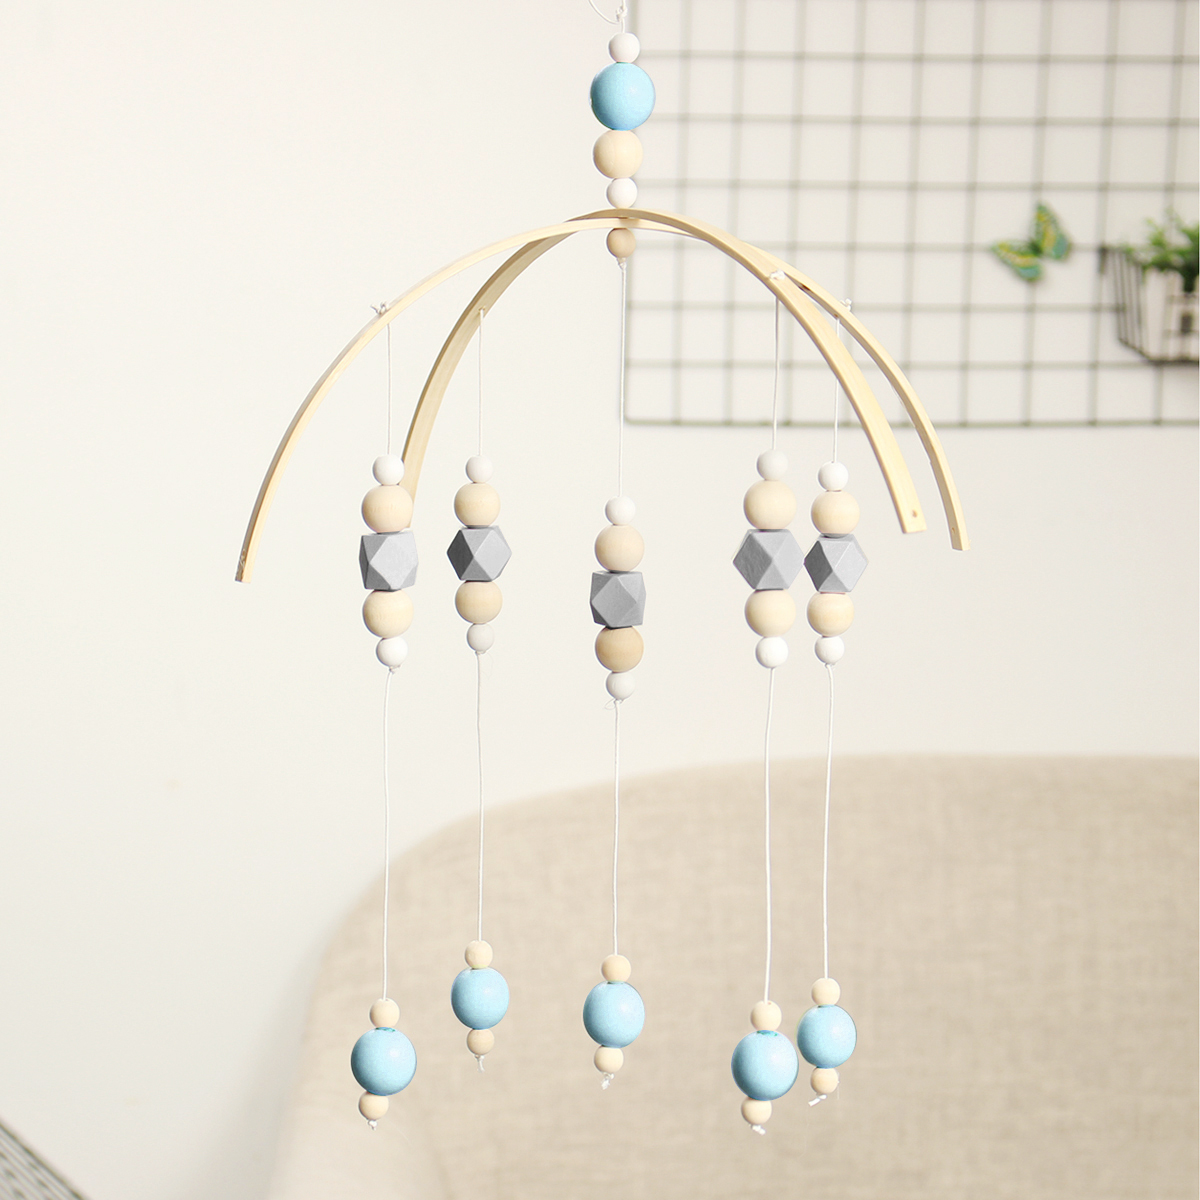 Wooden-Beads-Wind-Chimes-with-Wool-Balls-Baby-Bed-Hanging-Windbell-Crib-Tent-Kids-Room-Decorations-O-1906546-10